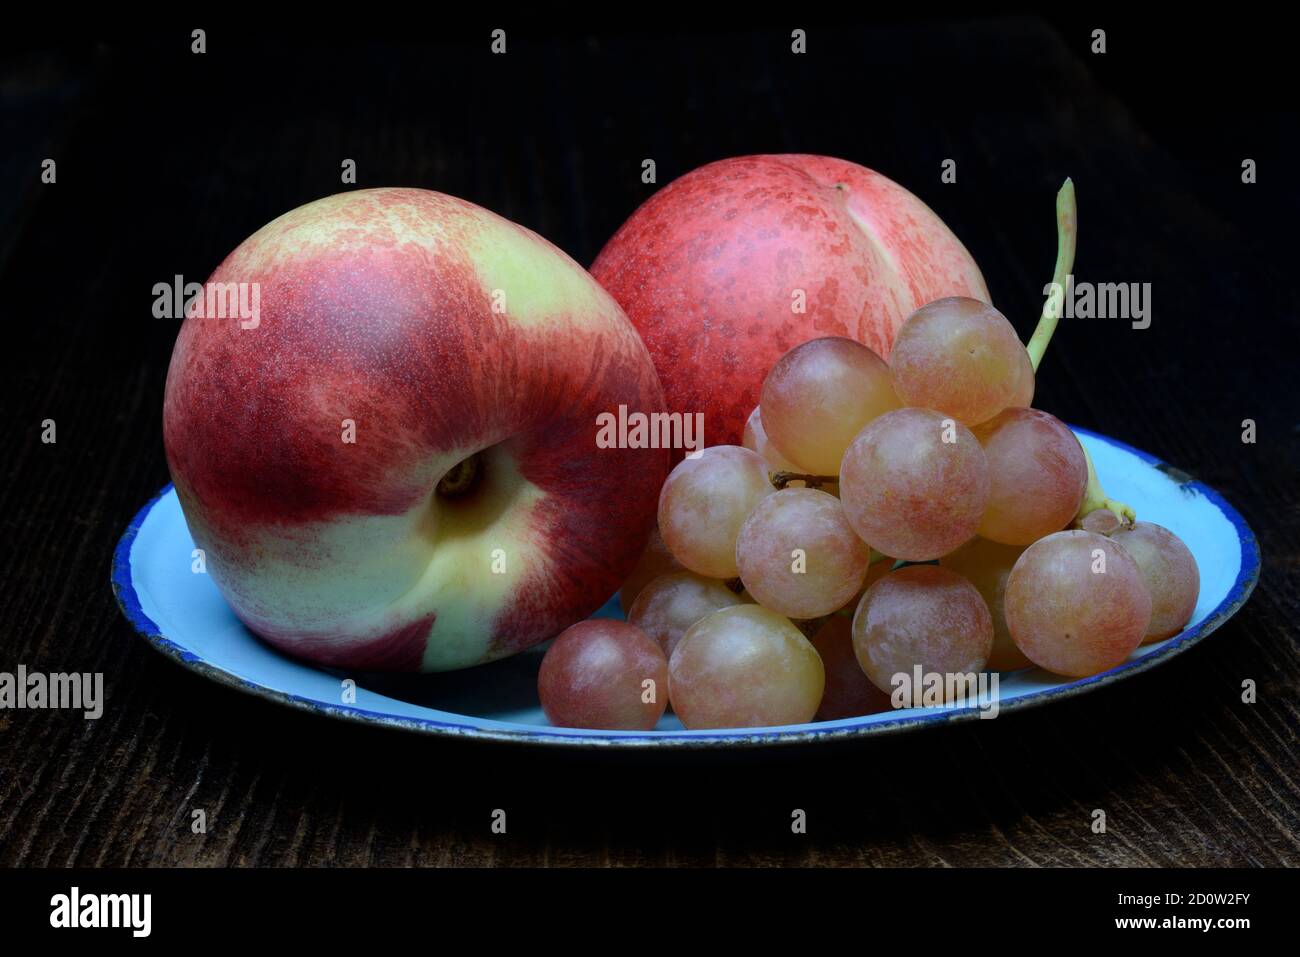 Nectarines and table grapes on plate, Germany, Europe Stock Photo